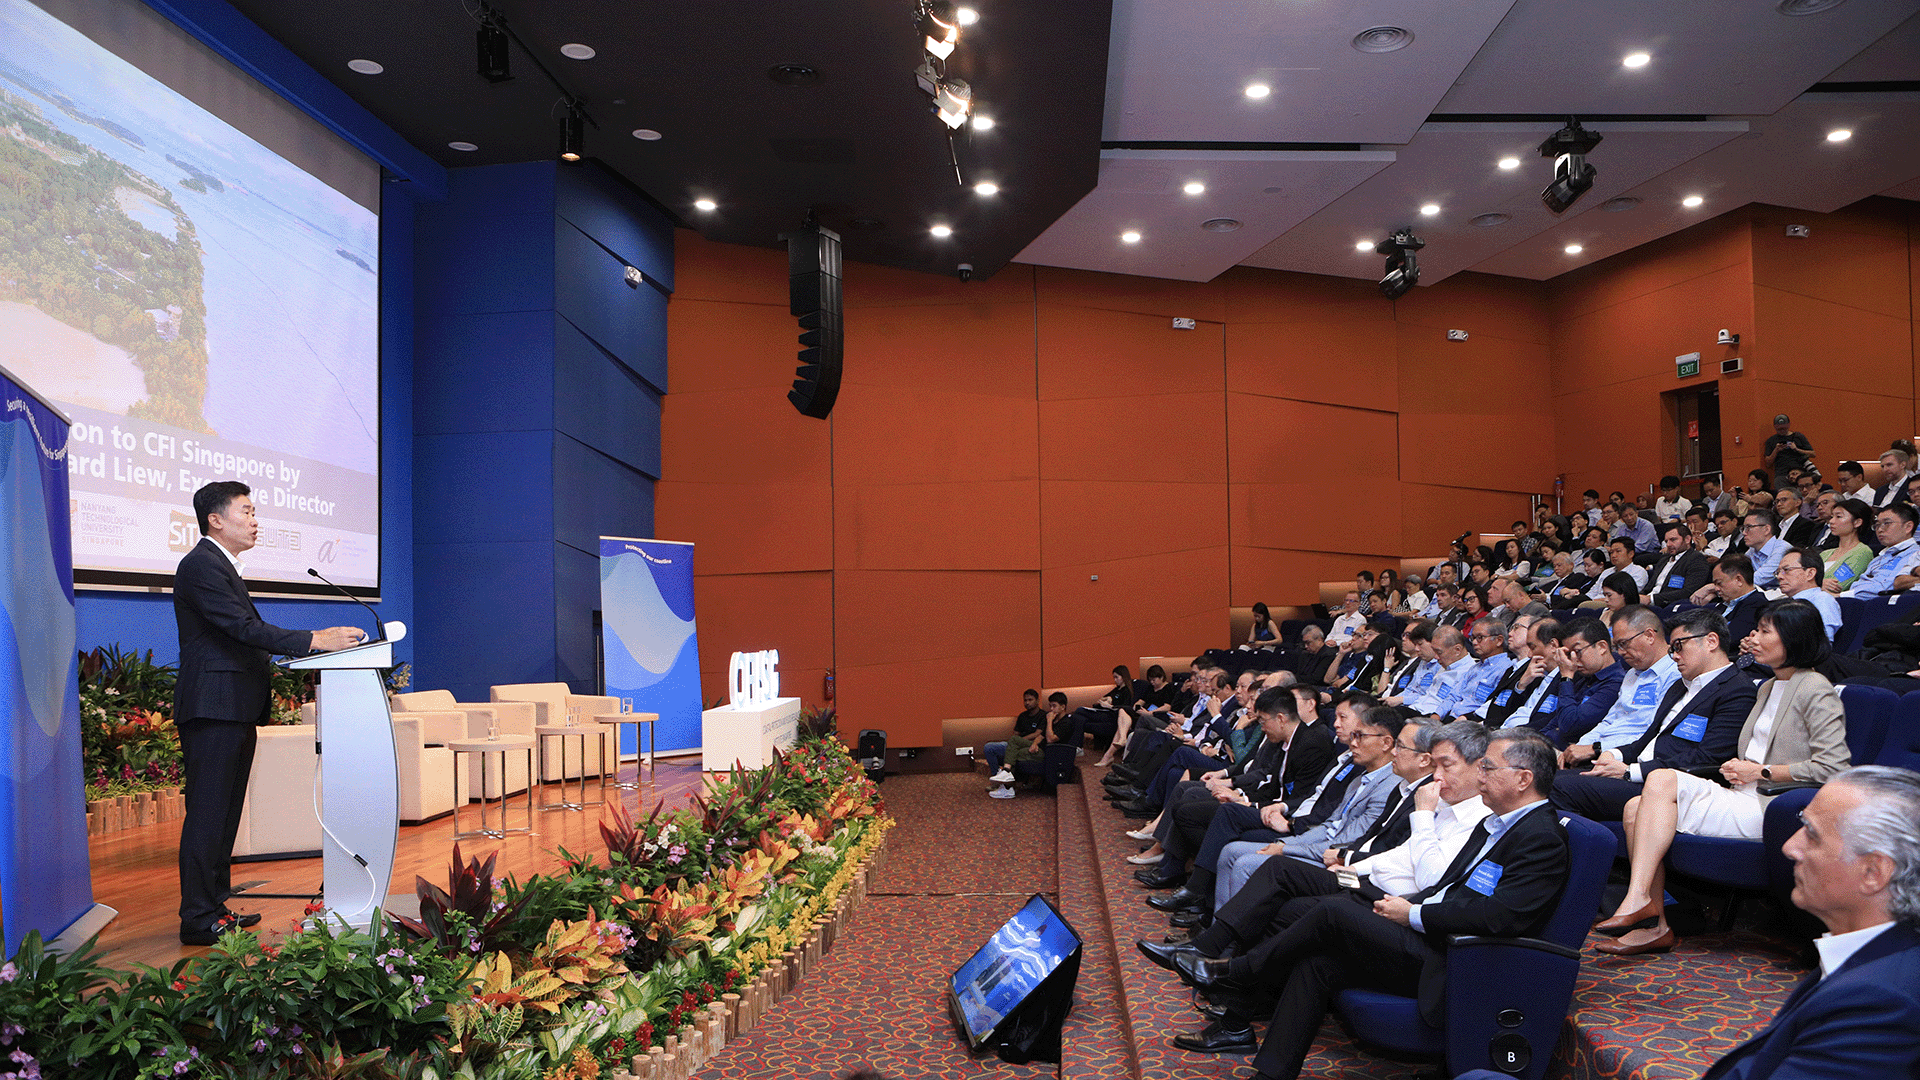 Prof Richard Liew, Executive Director CFI Singapore, said the new institute would develop solutions that are practical, sustainable and resonate with the needs of the relevant local communities.